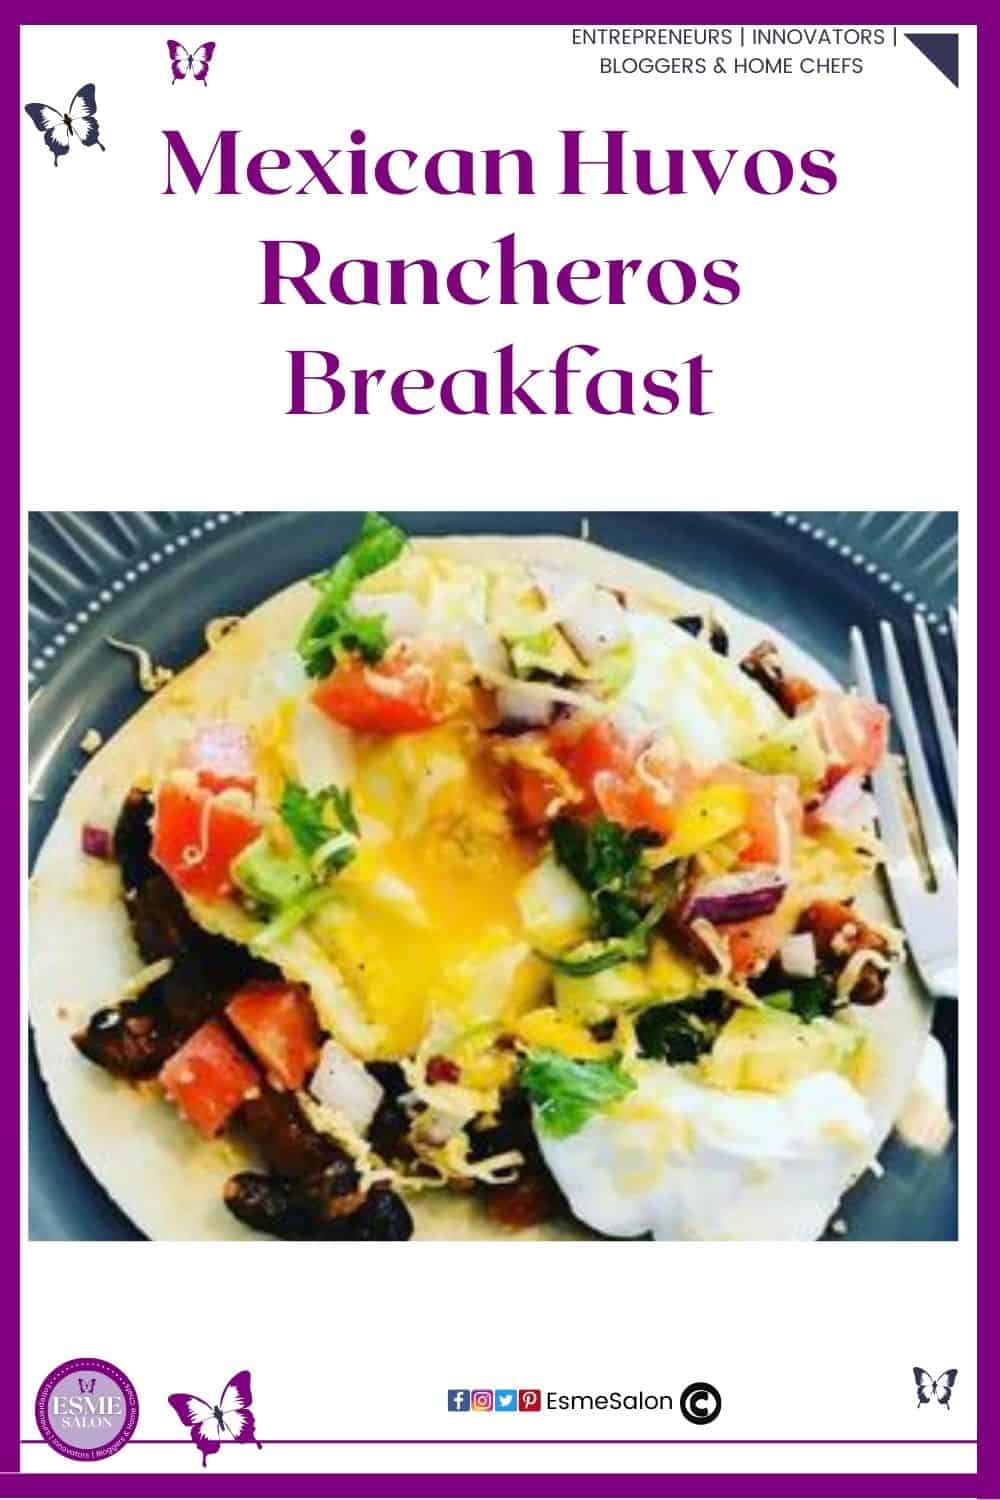 an image of a plate filled with a Mexican Huevos Rancheros Breakfast